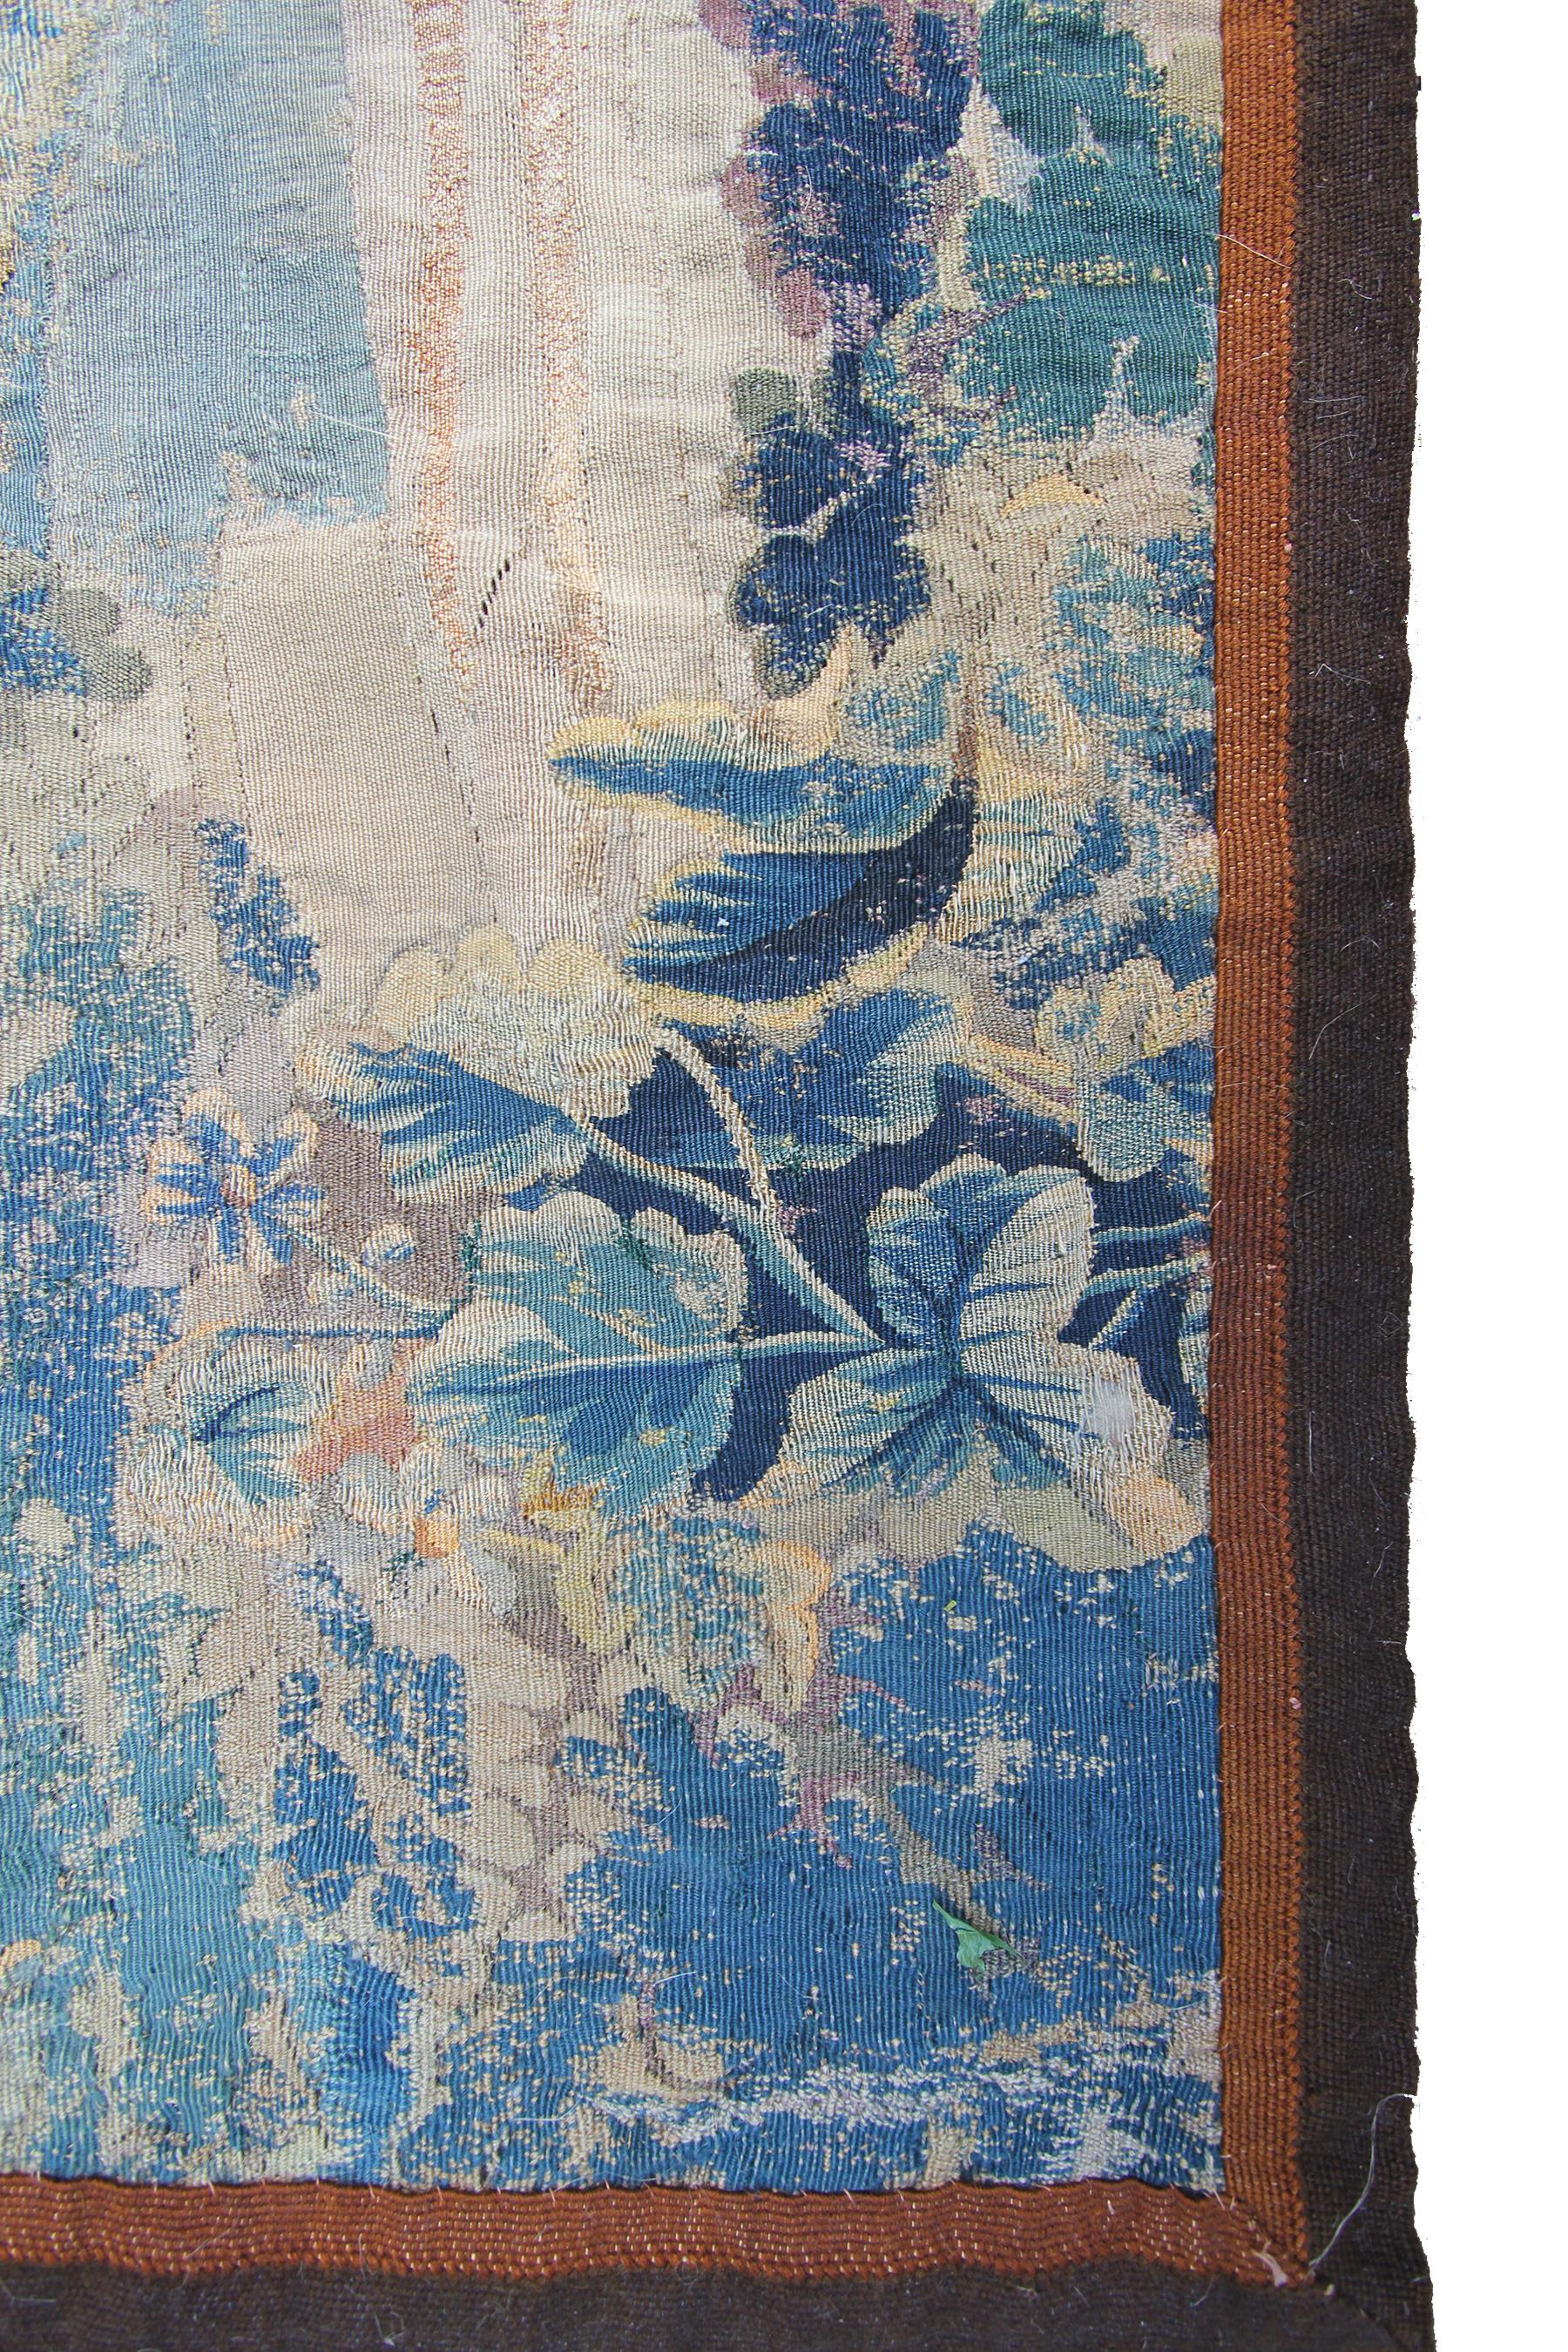 Late 18th Century Antique French Tapestry 18th Century Handwoven Wool & Silk 5x6 143cm x 183cm